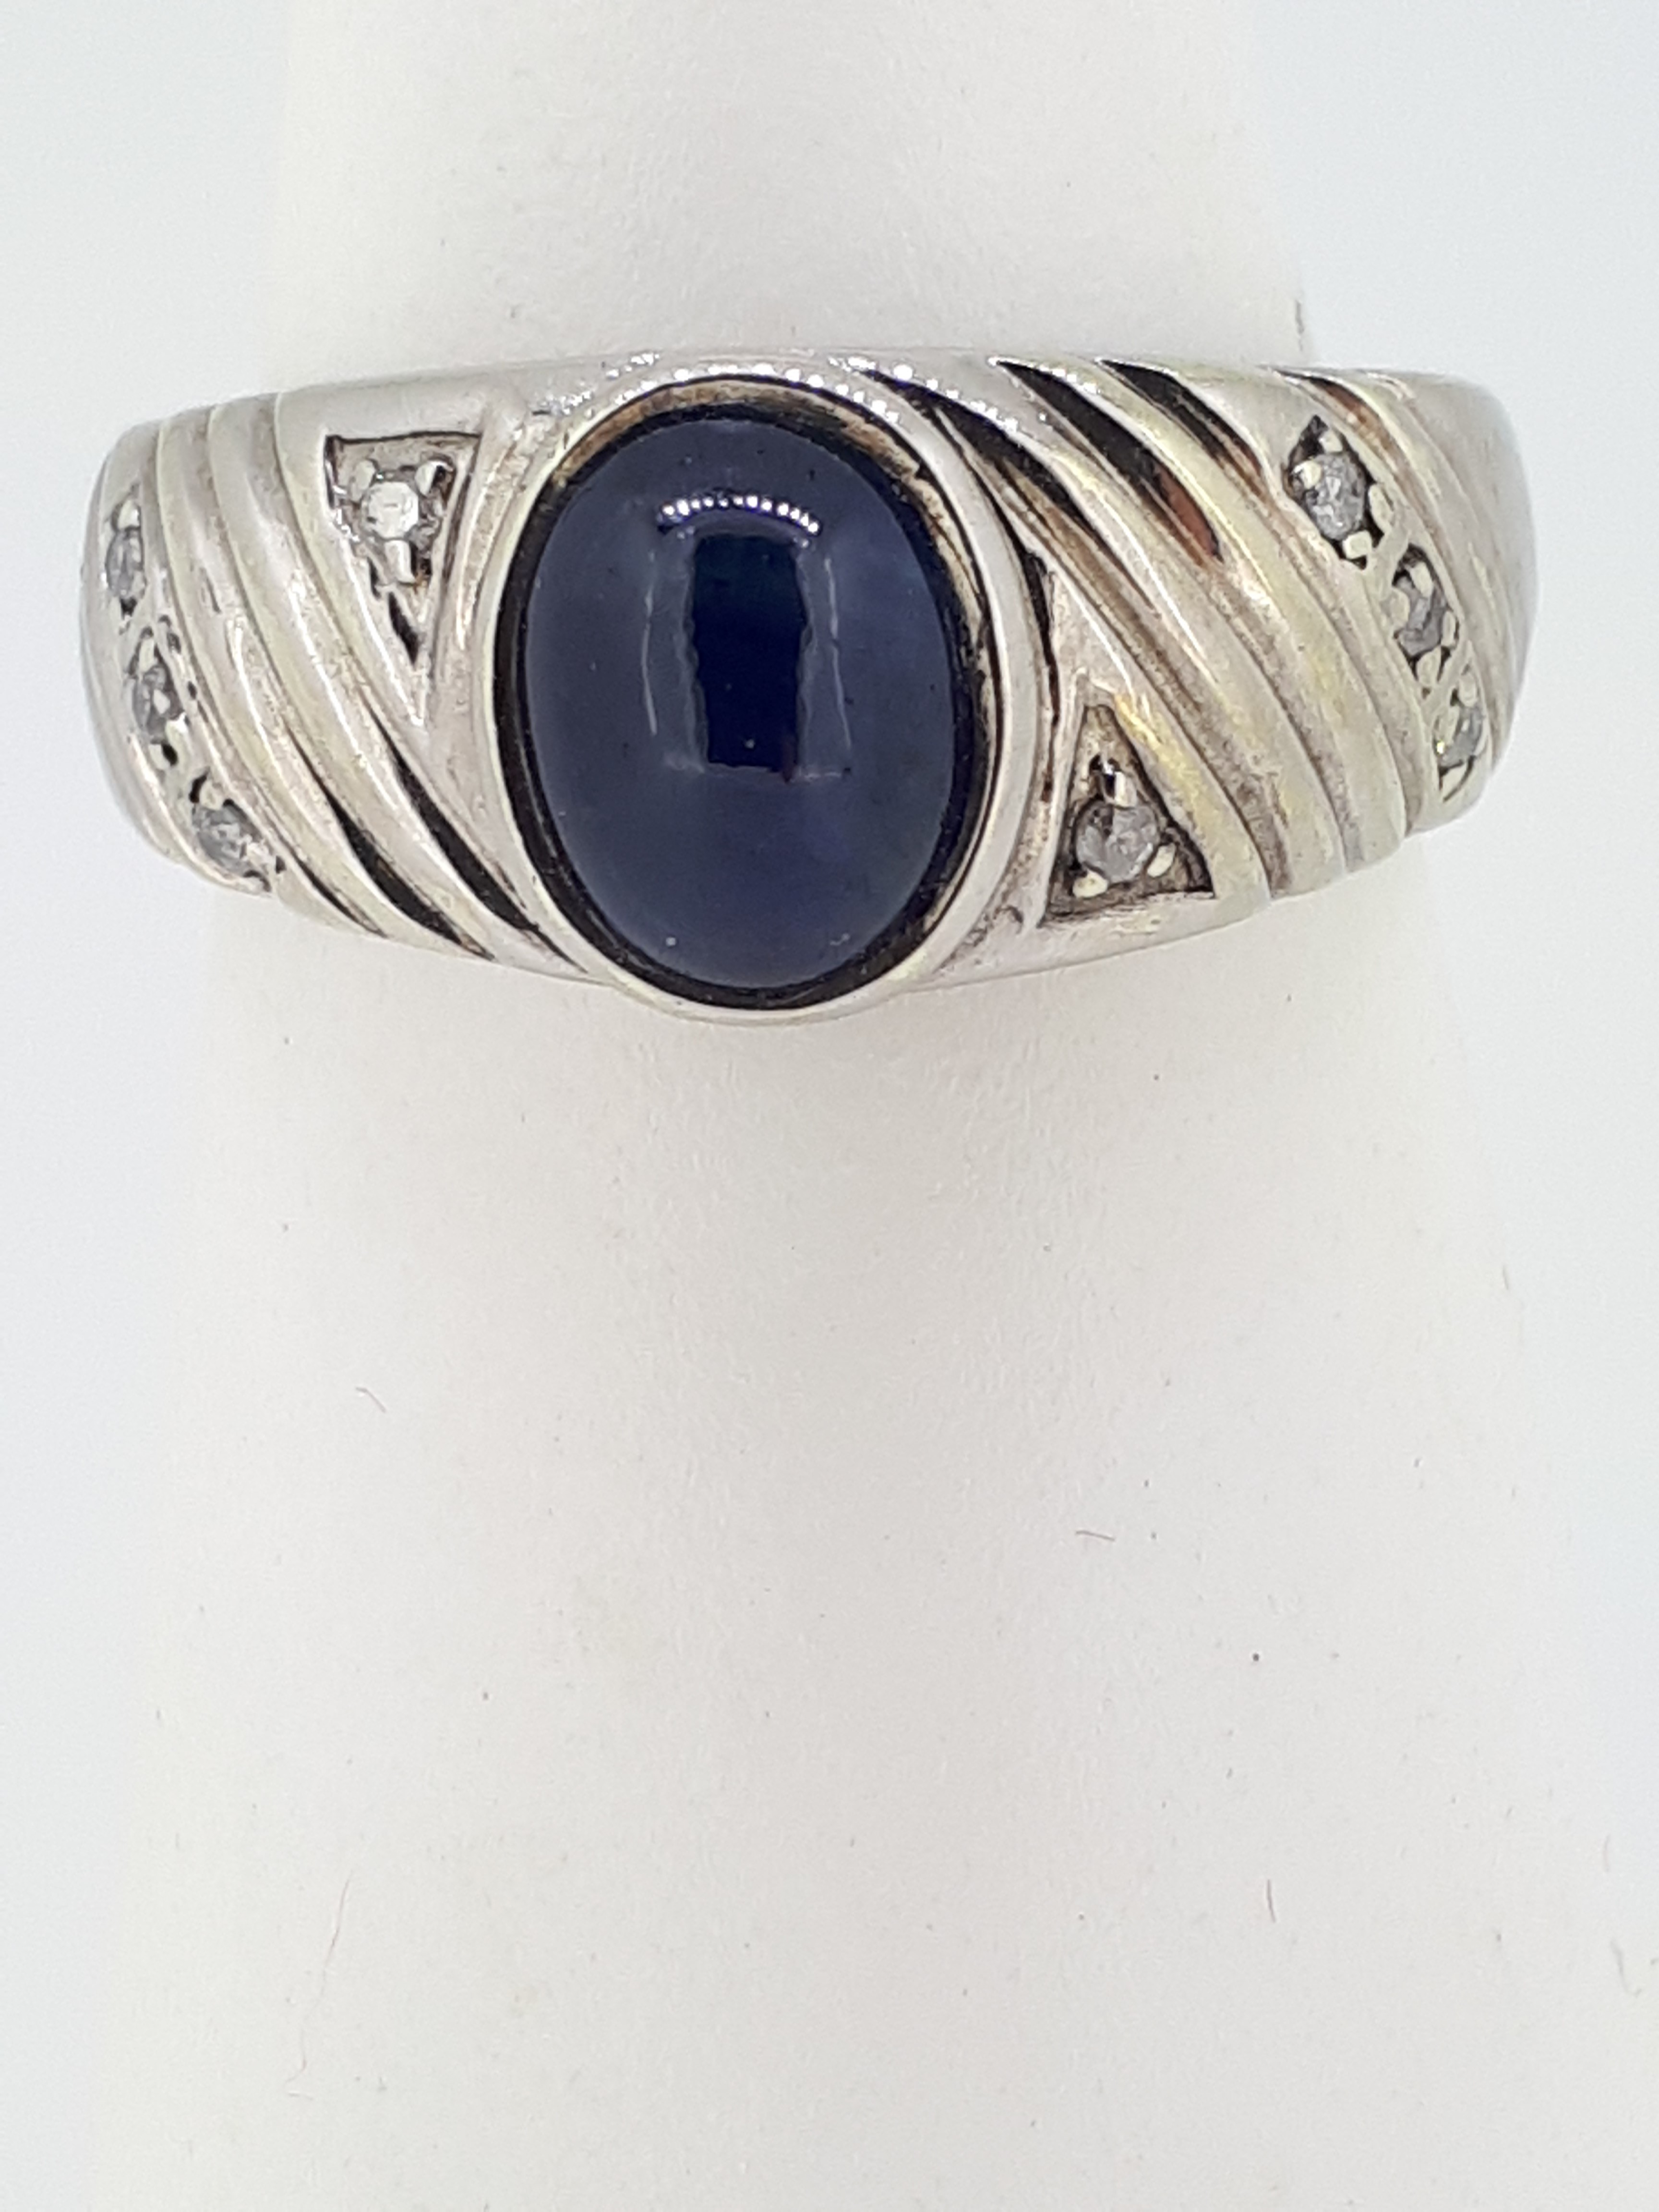 9ct (375) White Gold Oval Sapphire and Diamond Ring - Image 5 of 7